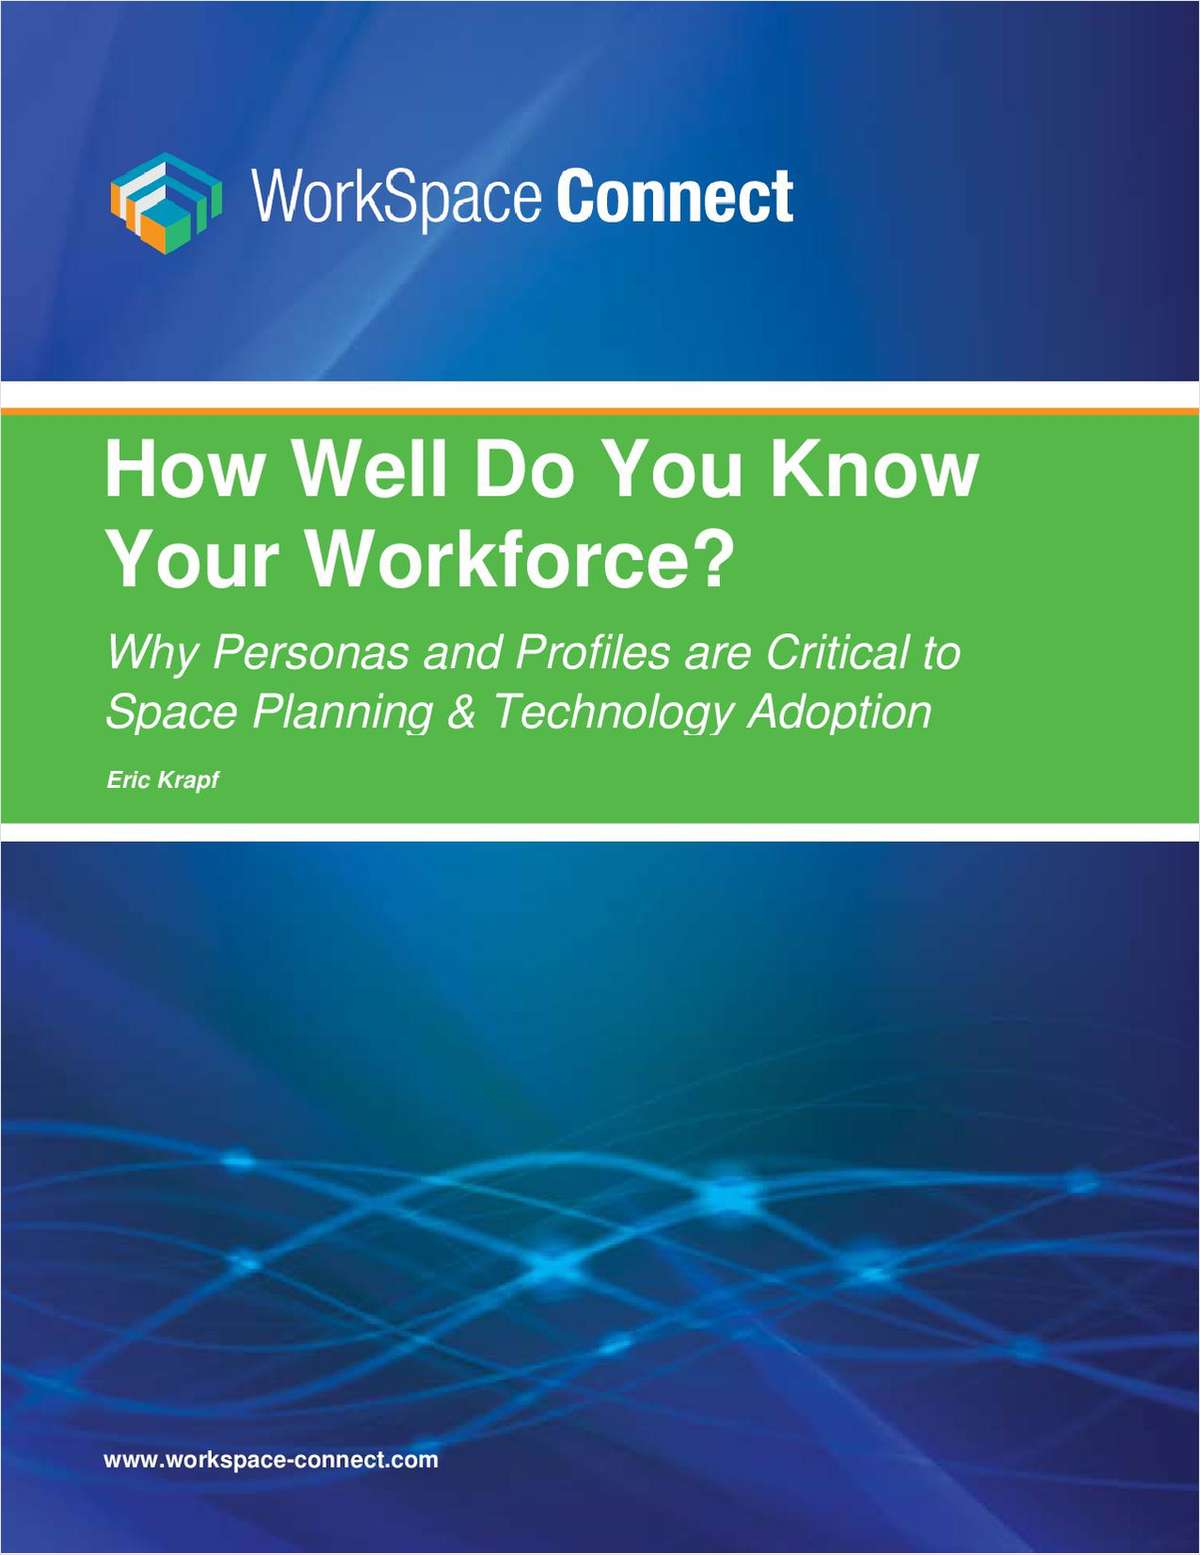 How Well Do You Know Your Workforce?